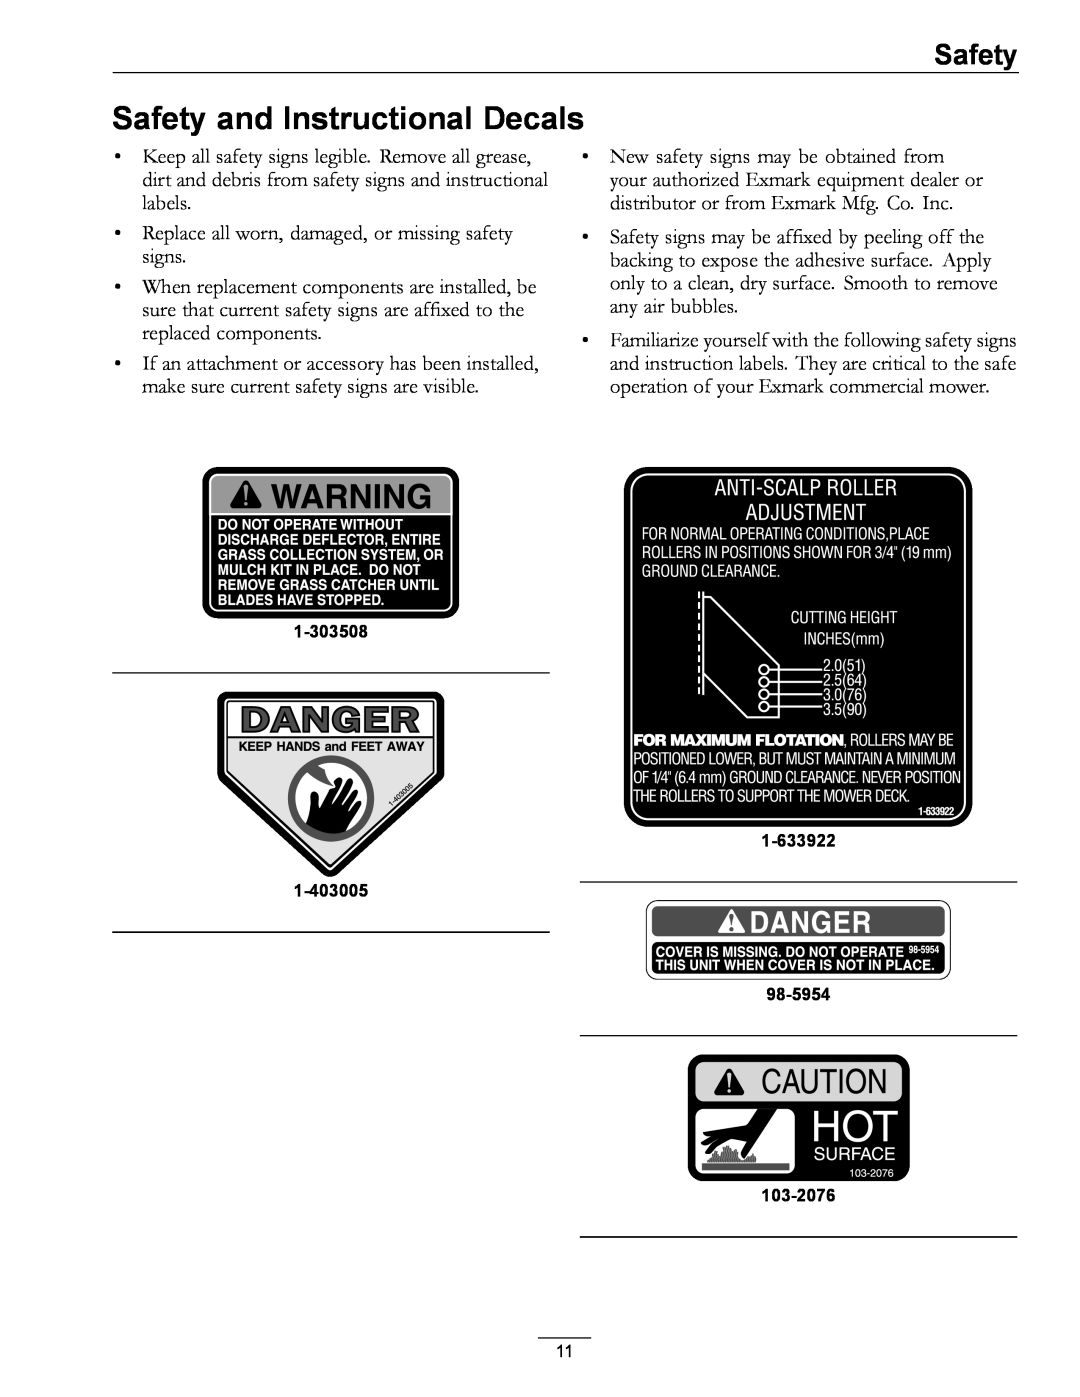 Exmark 000 & higher, 312 manual Safety and Instructional Decals 